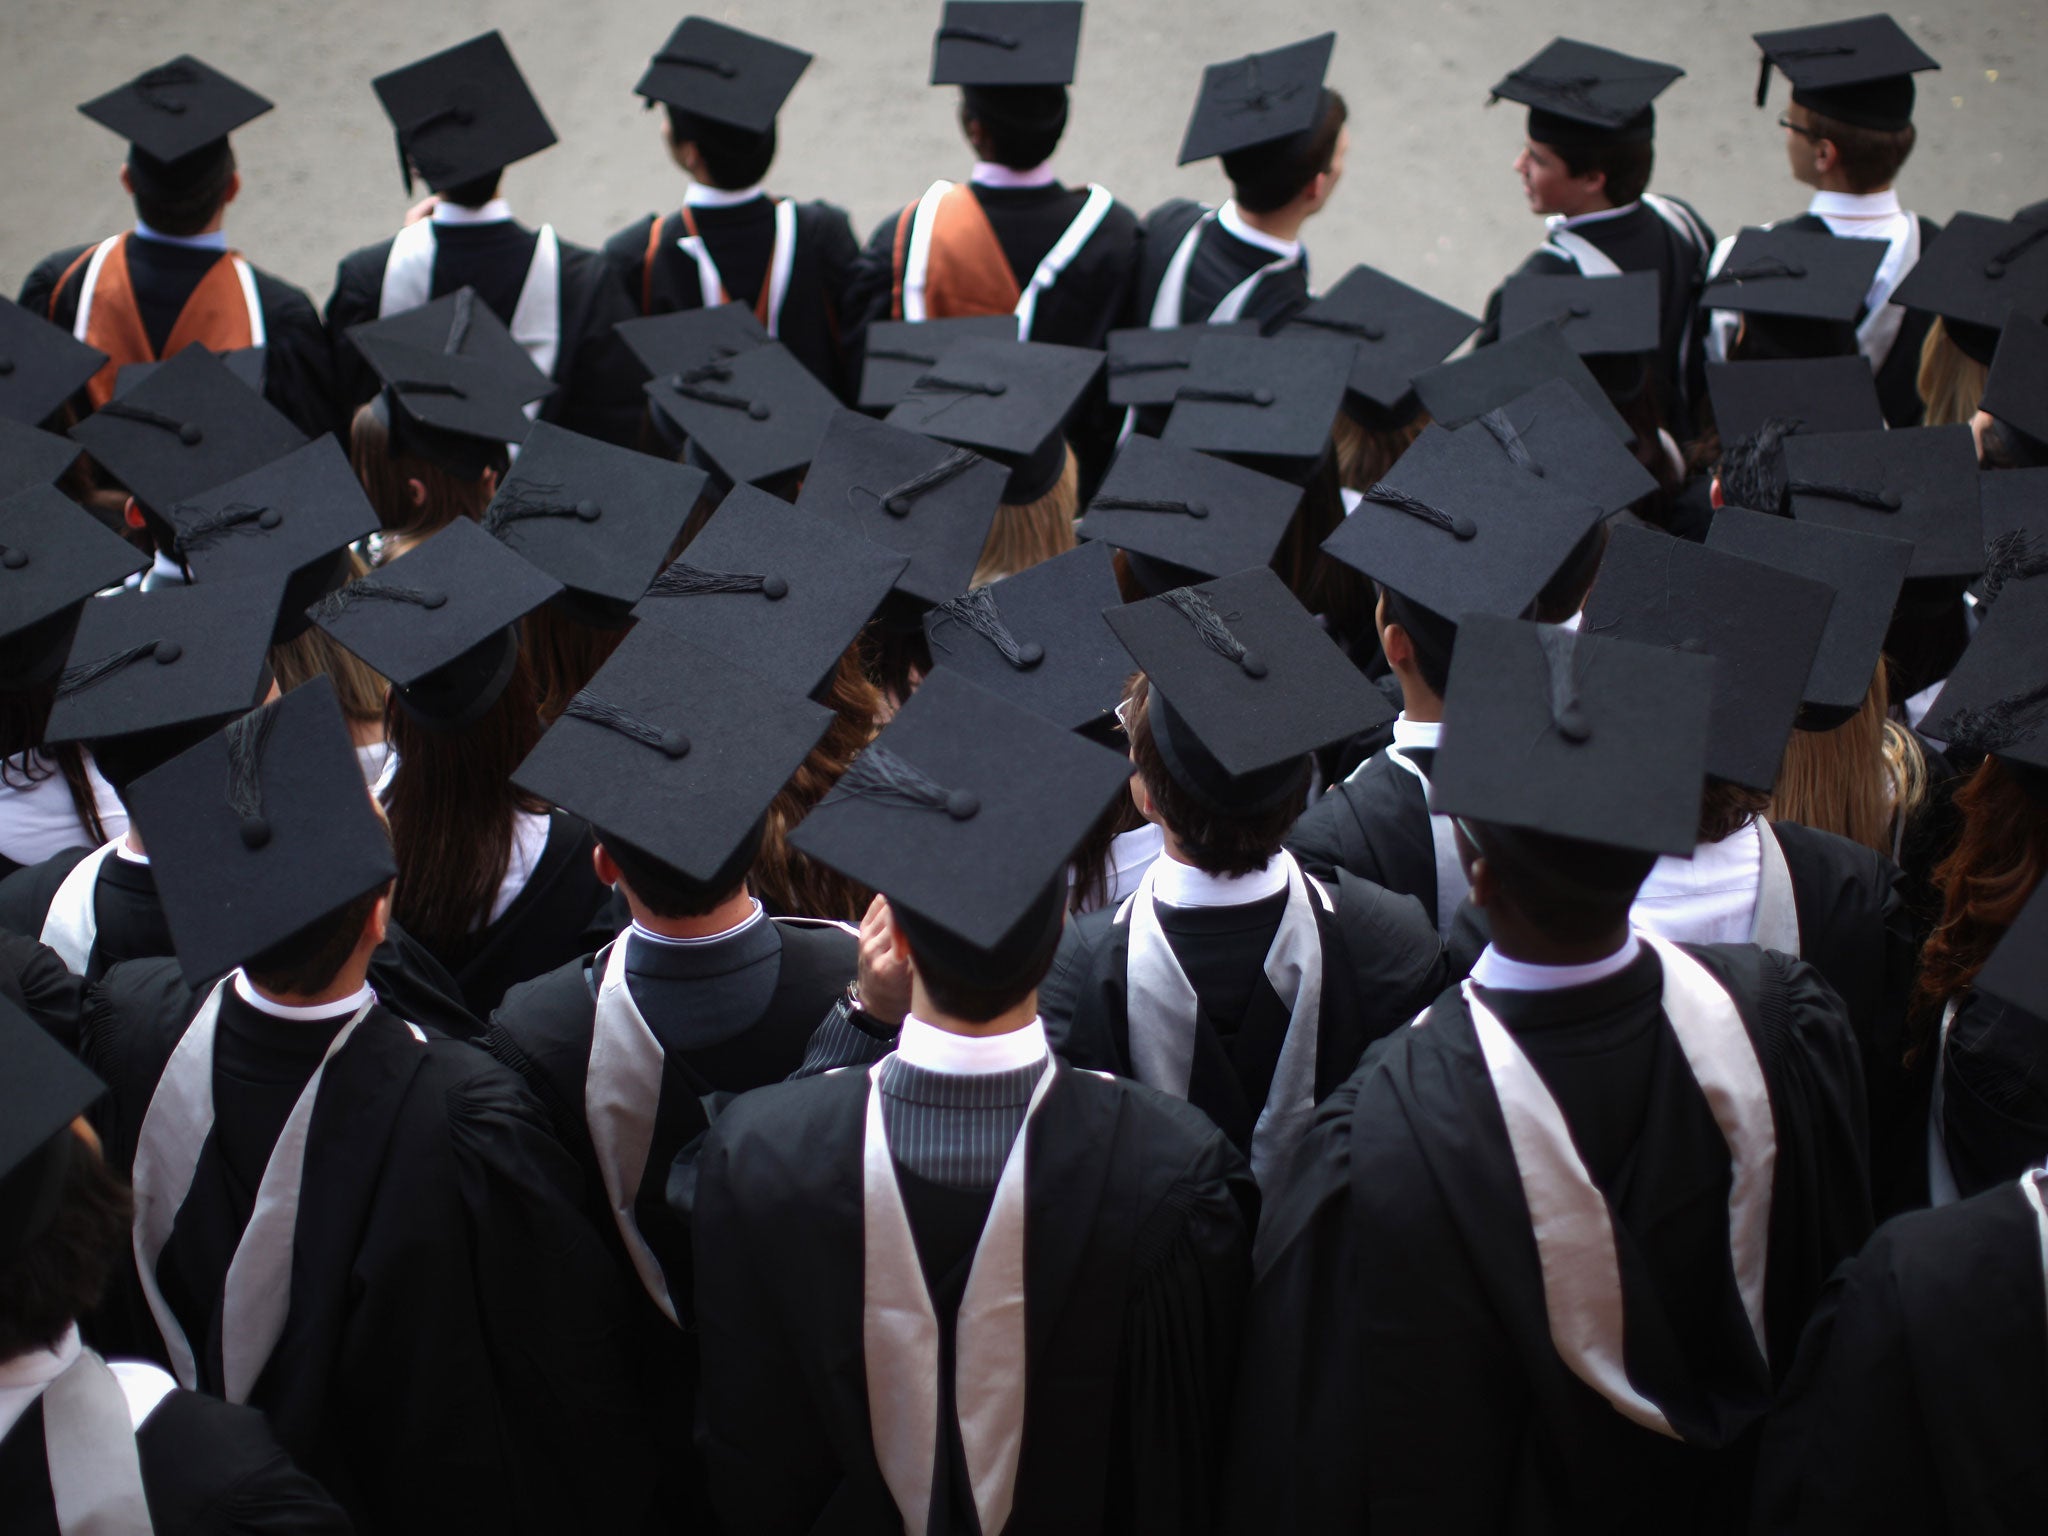 Students from Europe have long sought higher education in the UK